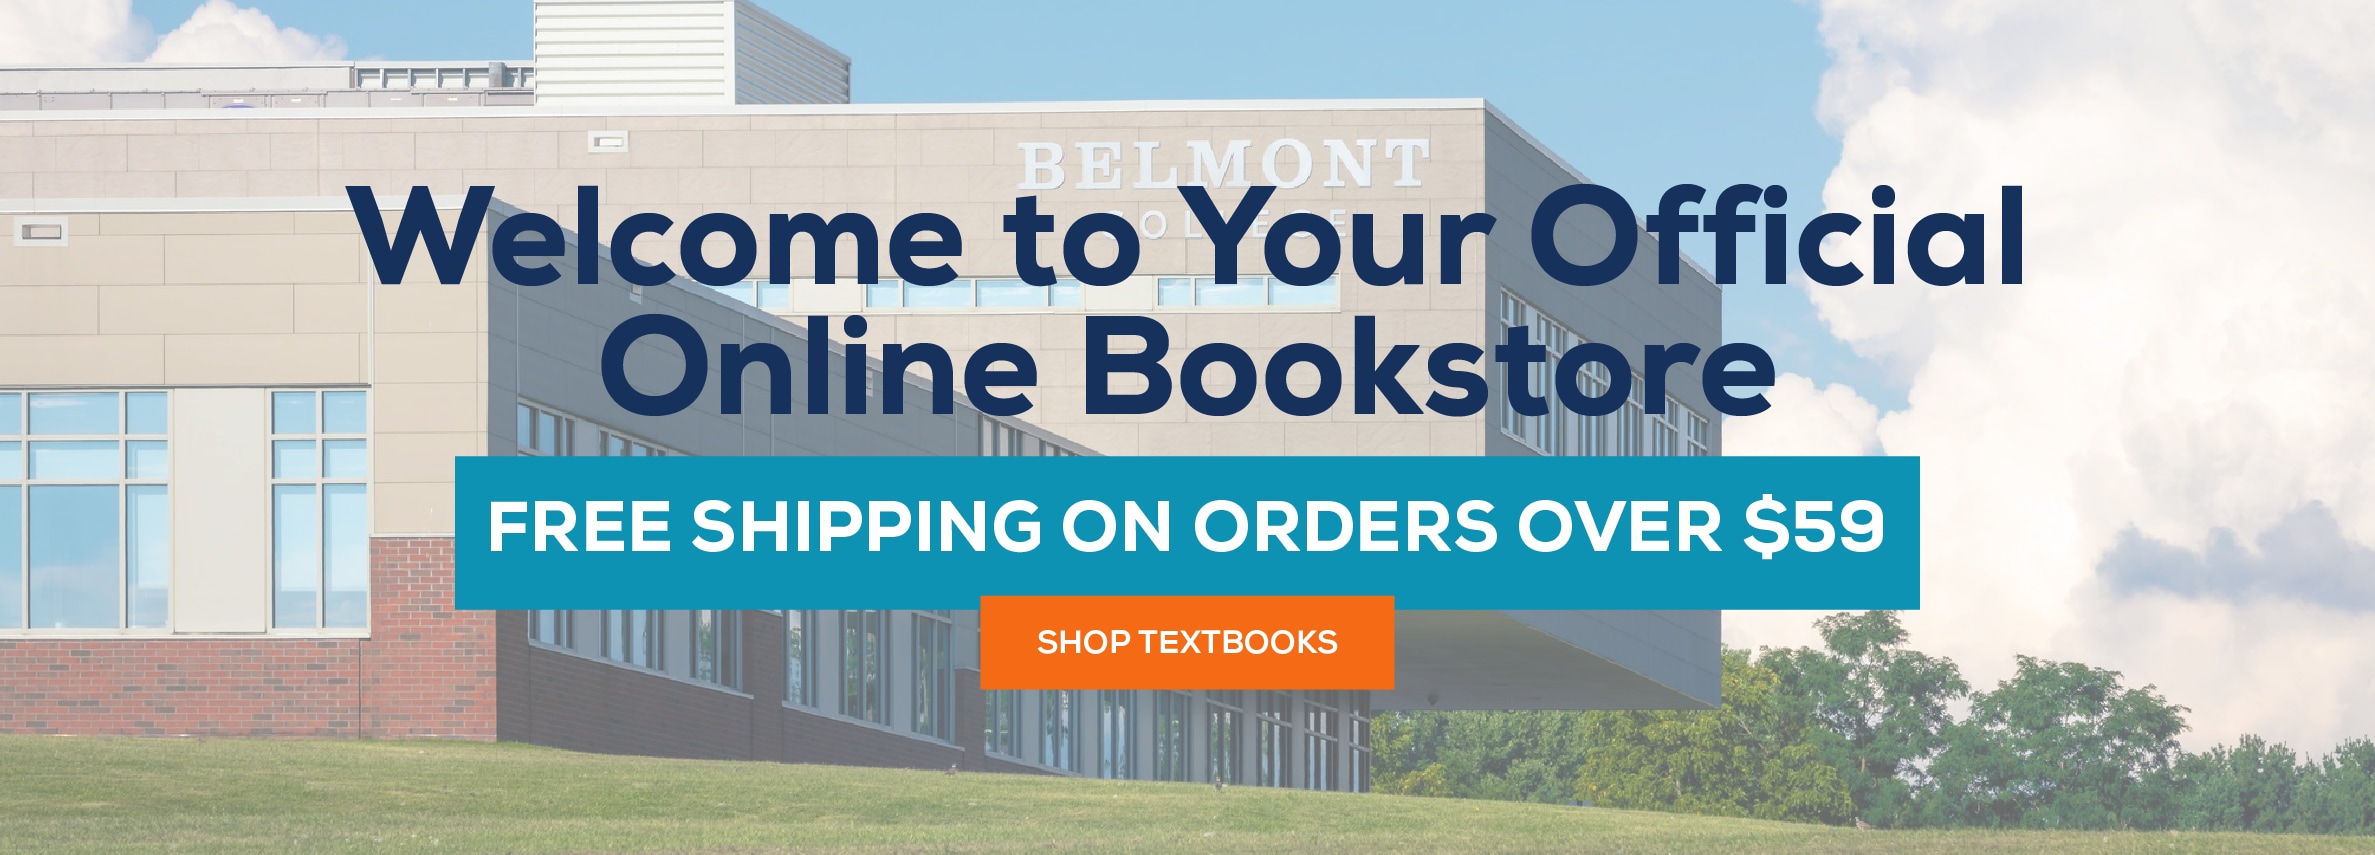 Welcome to Your Official Online Bookstore. Free shipping on orders over $59. Shop textbooks.